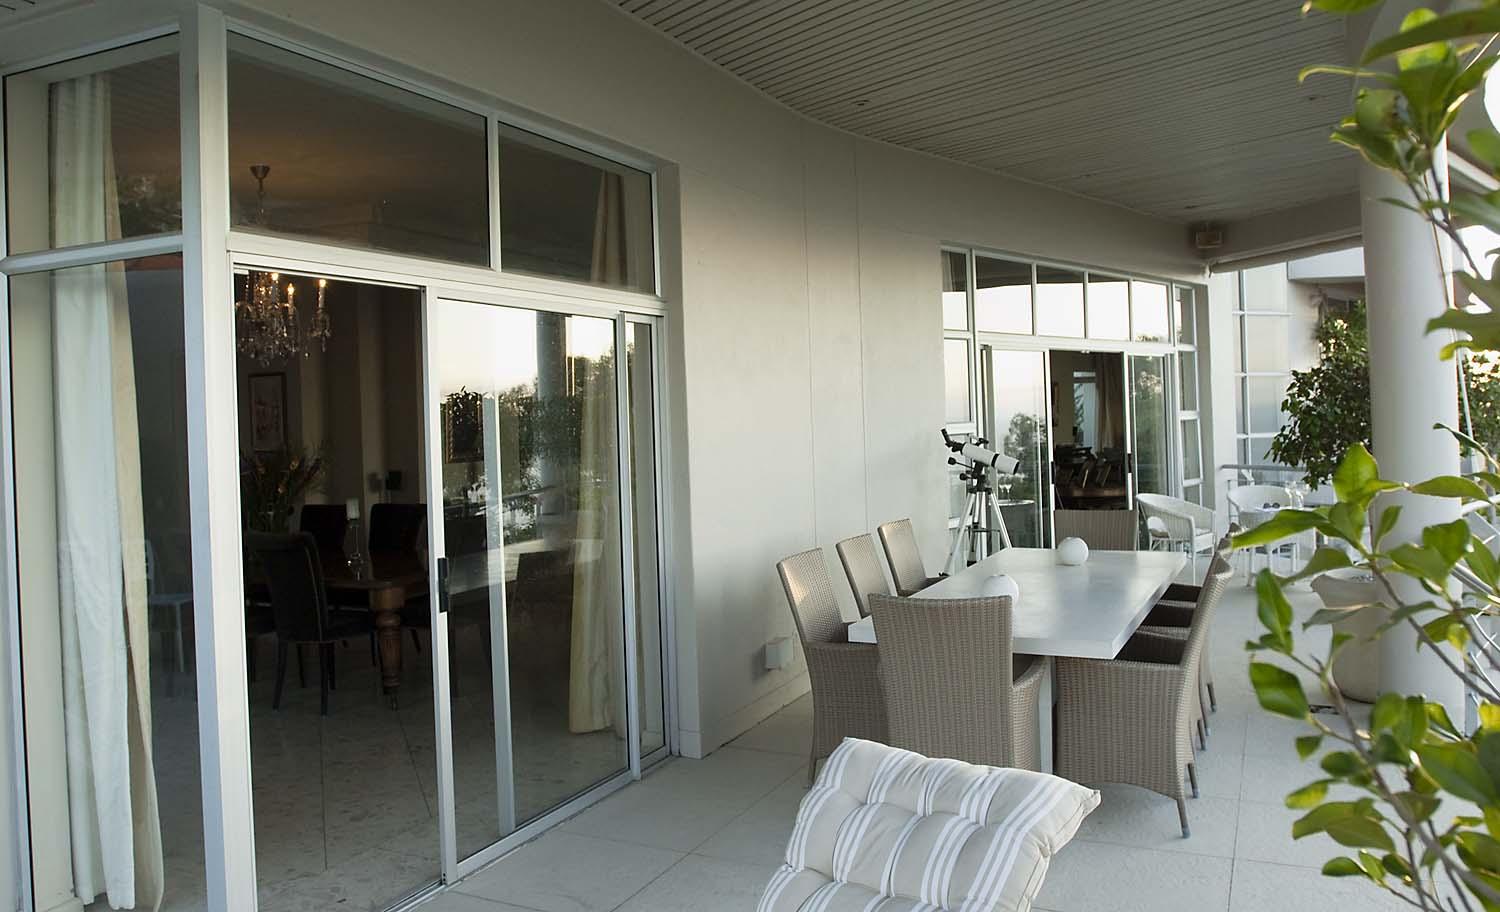 Photo 11 of Villa Marina accommodation in Bantry Bay, Cape Town with 4 bedrooms and 4 bathrooms